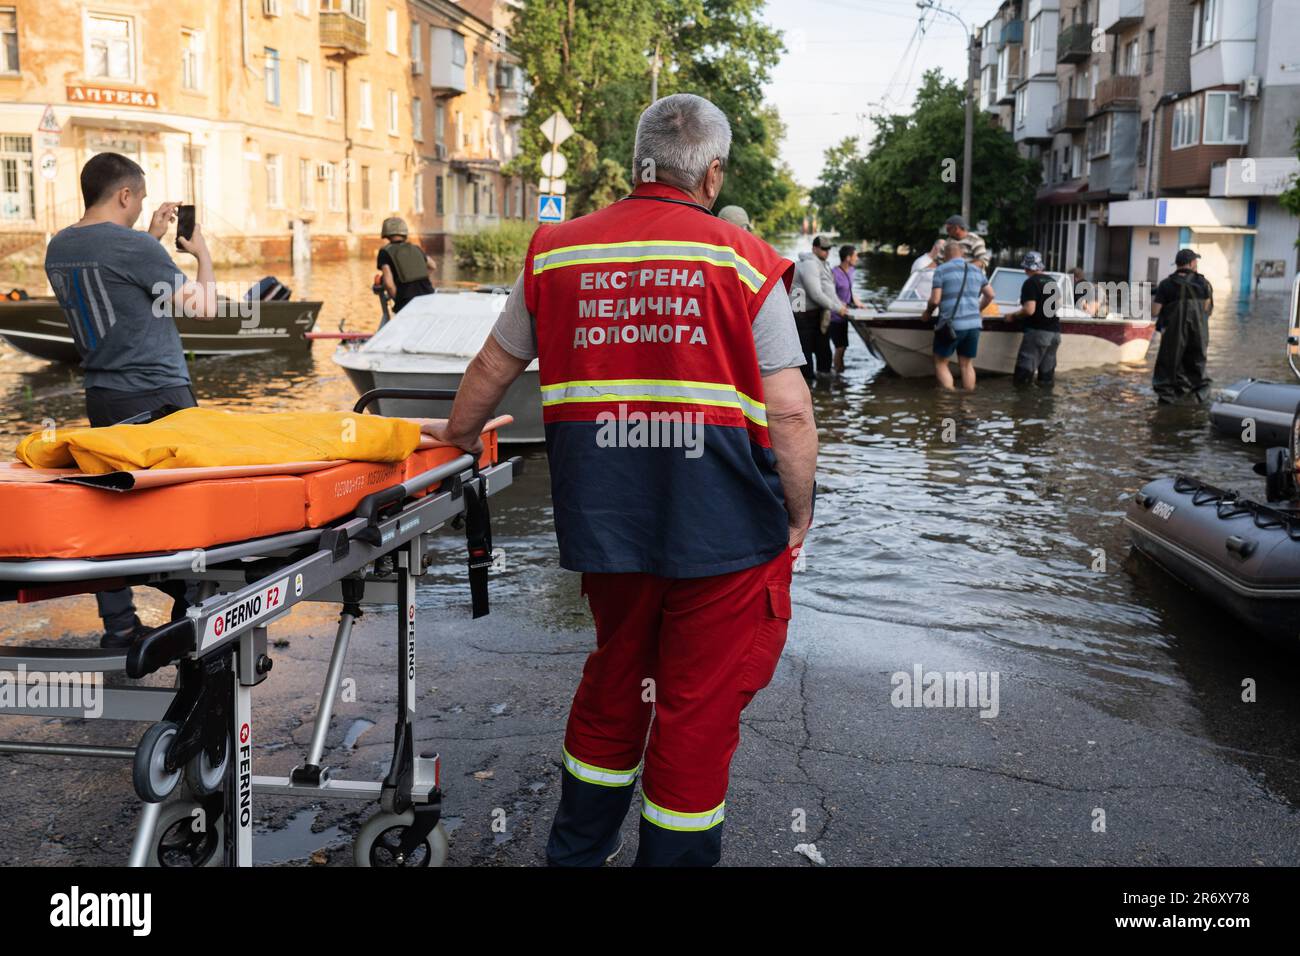 June 9, 2023, Kherson, Ukraine: A paramedic is seen waiting with a medical bed at the bank of the river in Kherson City. Kherson civilians have been evacuated as flooding continues to affect some areas in the city. Some evacuees are coming from left bank of Dnipro River, the occupied territory and reunited to their family first time since liberation in last November. As the water level recedes, evacuation is still underway despite willingness to leave has dropped. The collapse of Nova Kakhovka dam in southern Ukraine in June 6 has forced more than 1,400 people to flee their homes. Ukrainian an Stock Photo